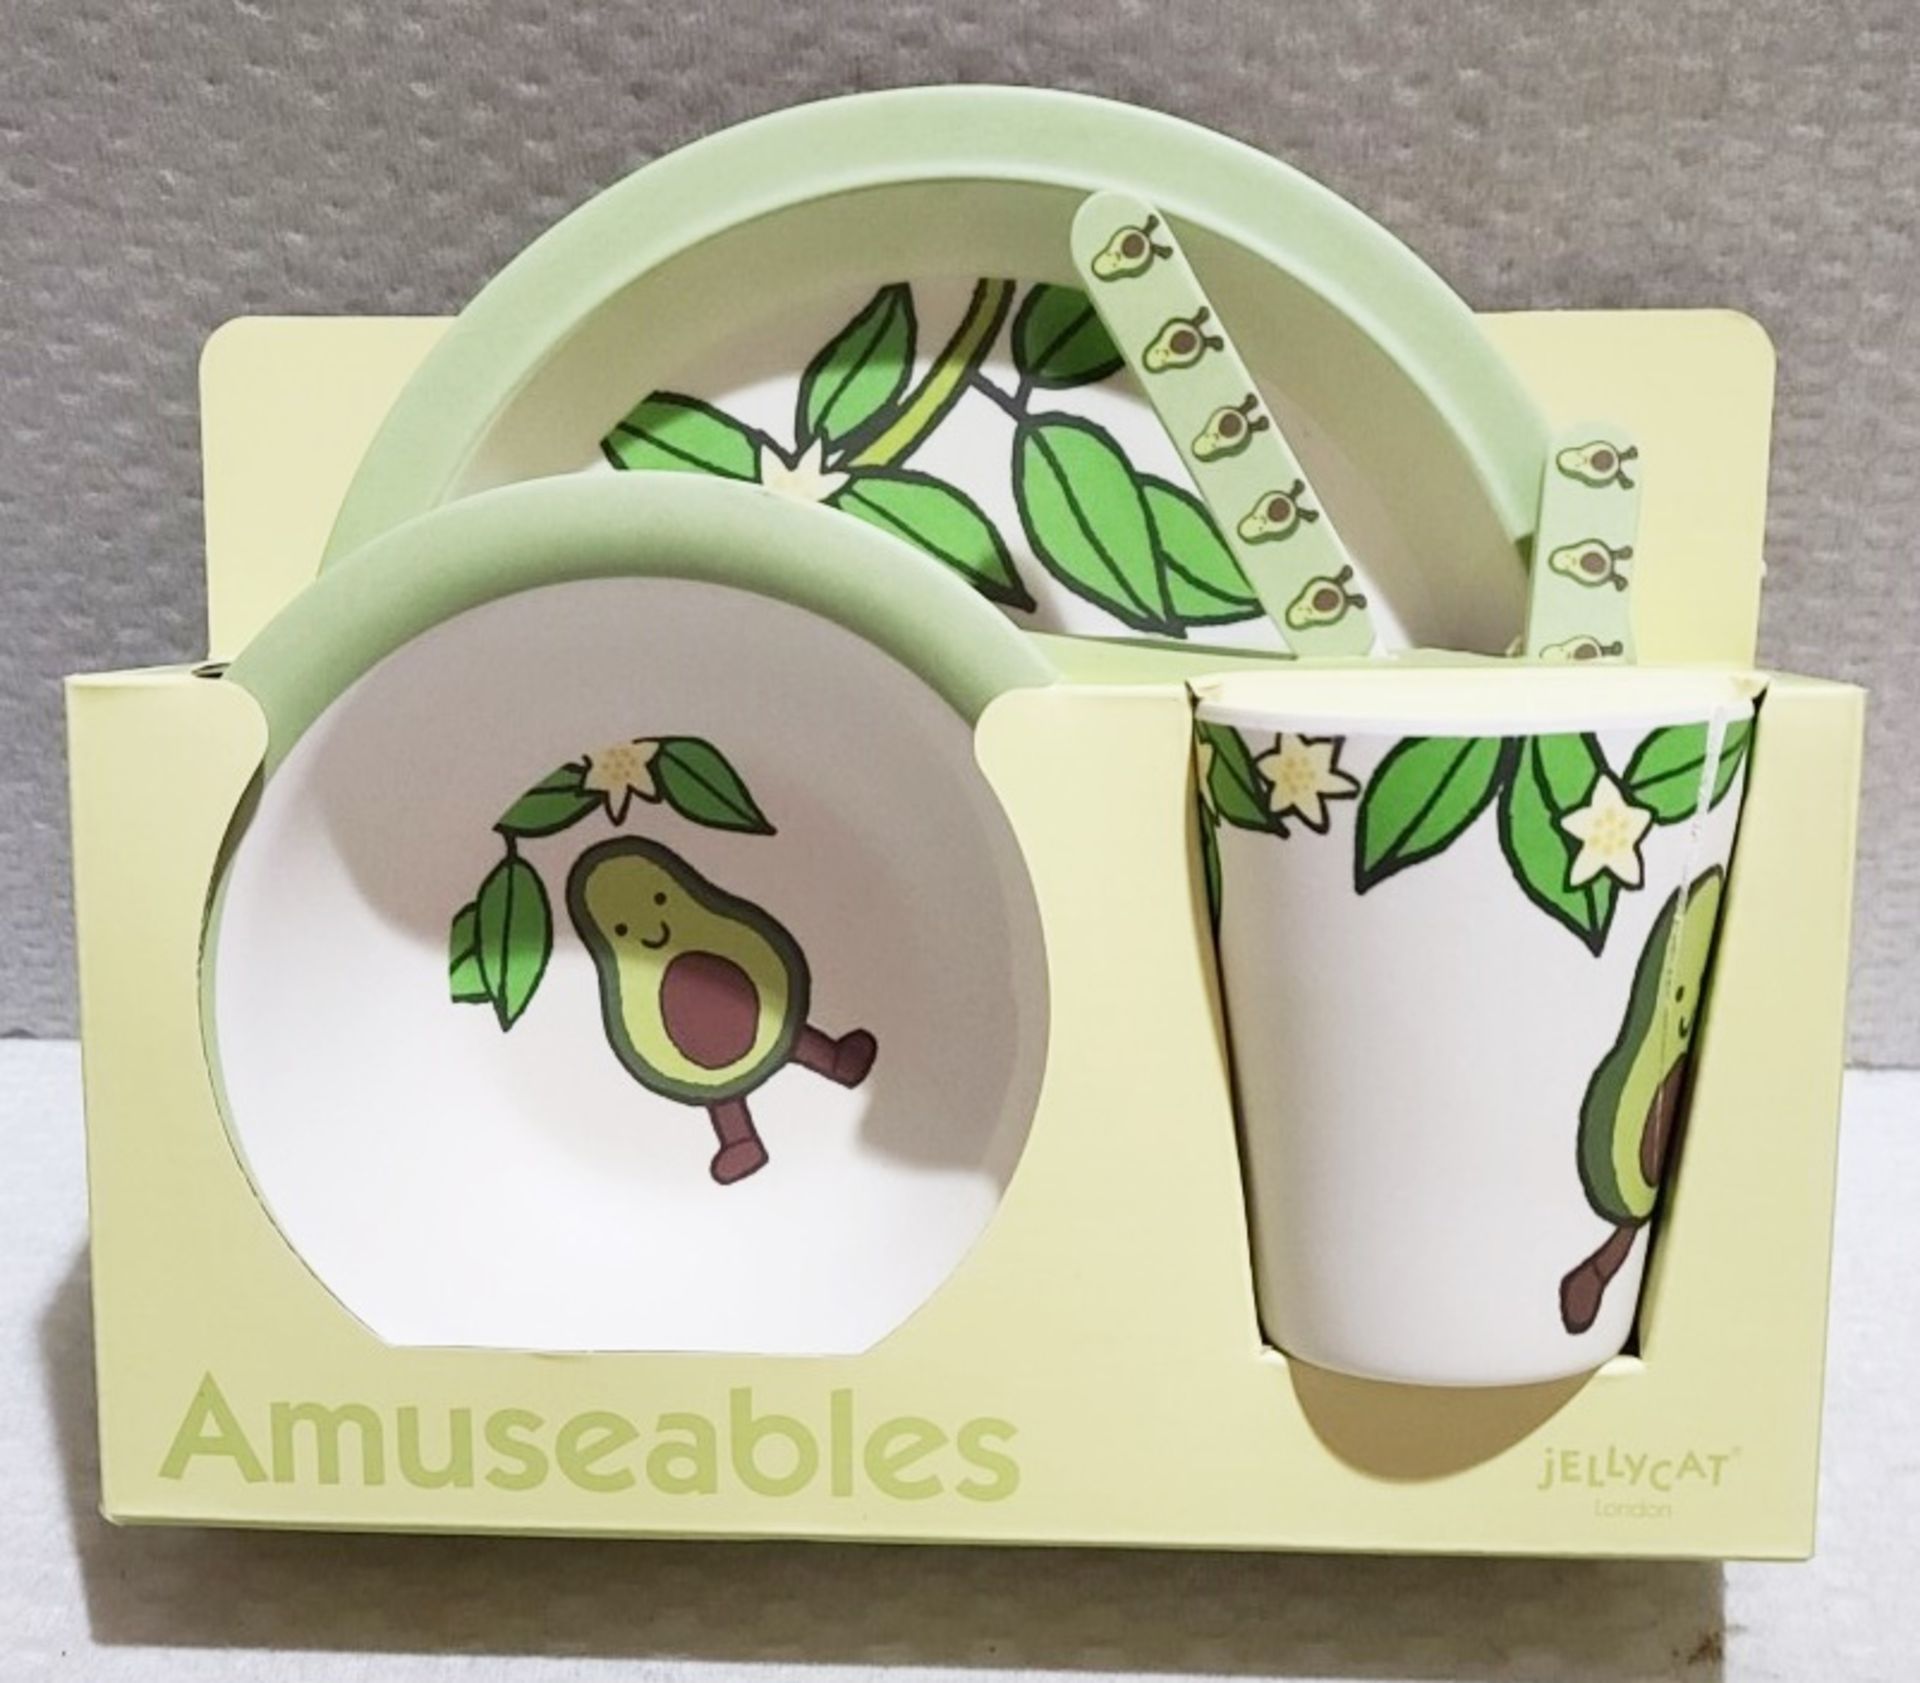 1 x JELLYCAT 'Amuseables' Avocado Print Bamboo Fibre Dining Set *See Condition Report - Image 6 of 6